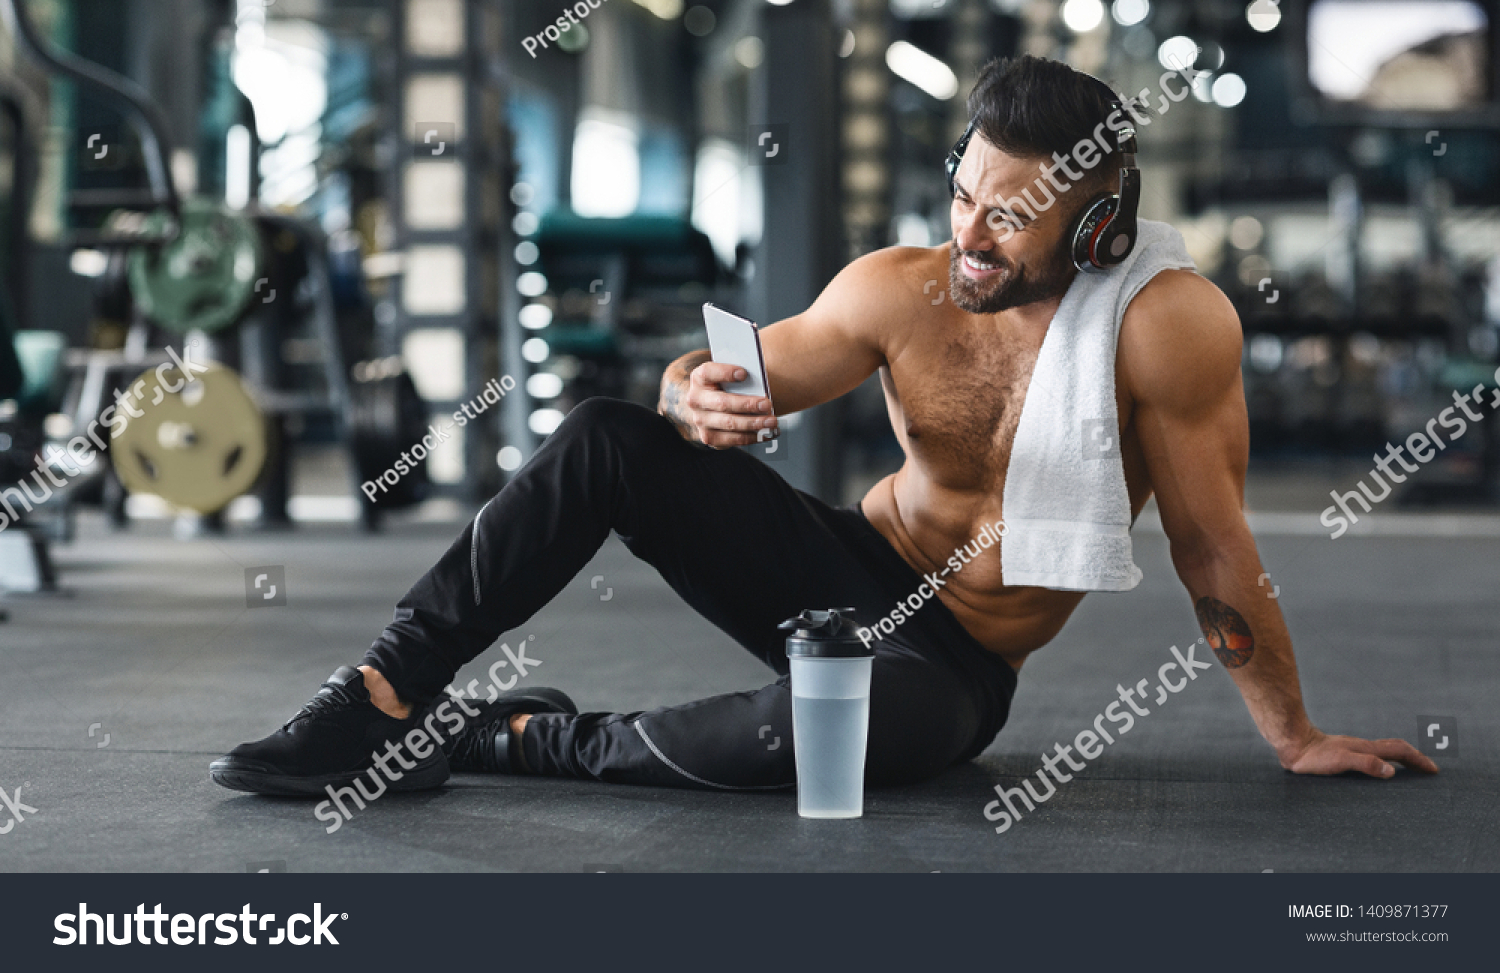 Online personal trainer on mobile phone. Muscular man using cellphone at gym, free space #1409871377